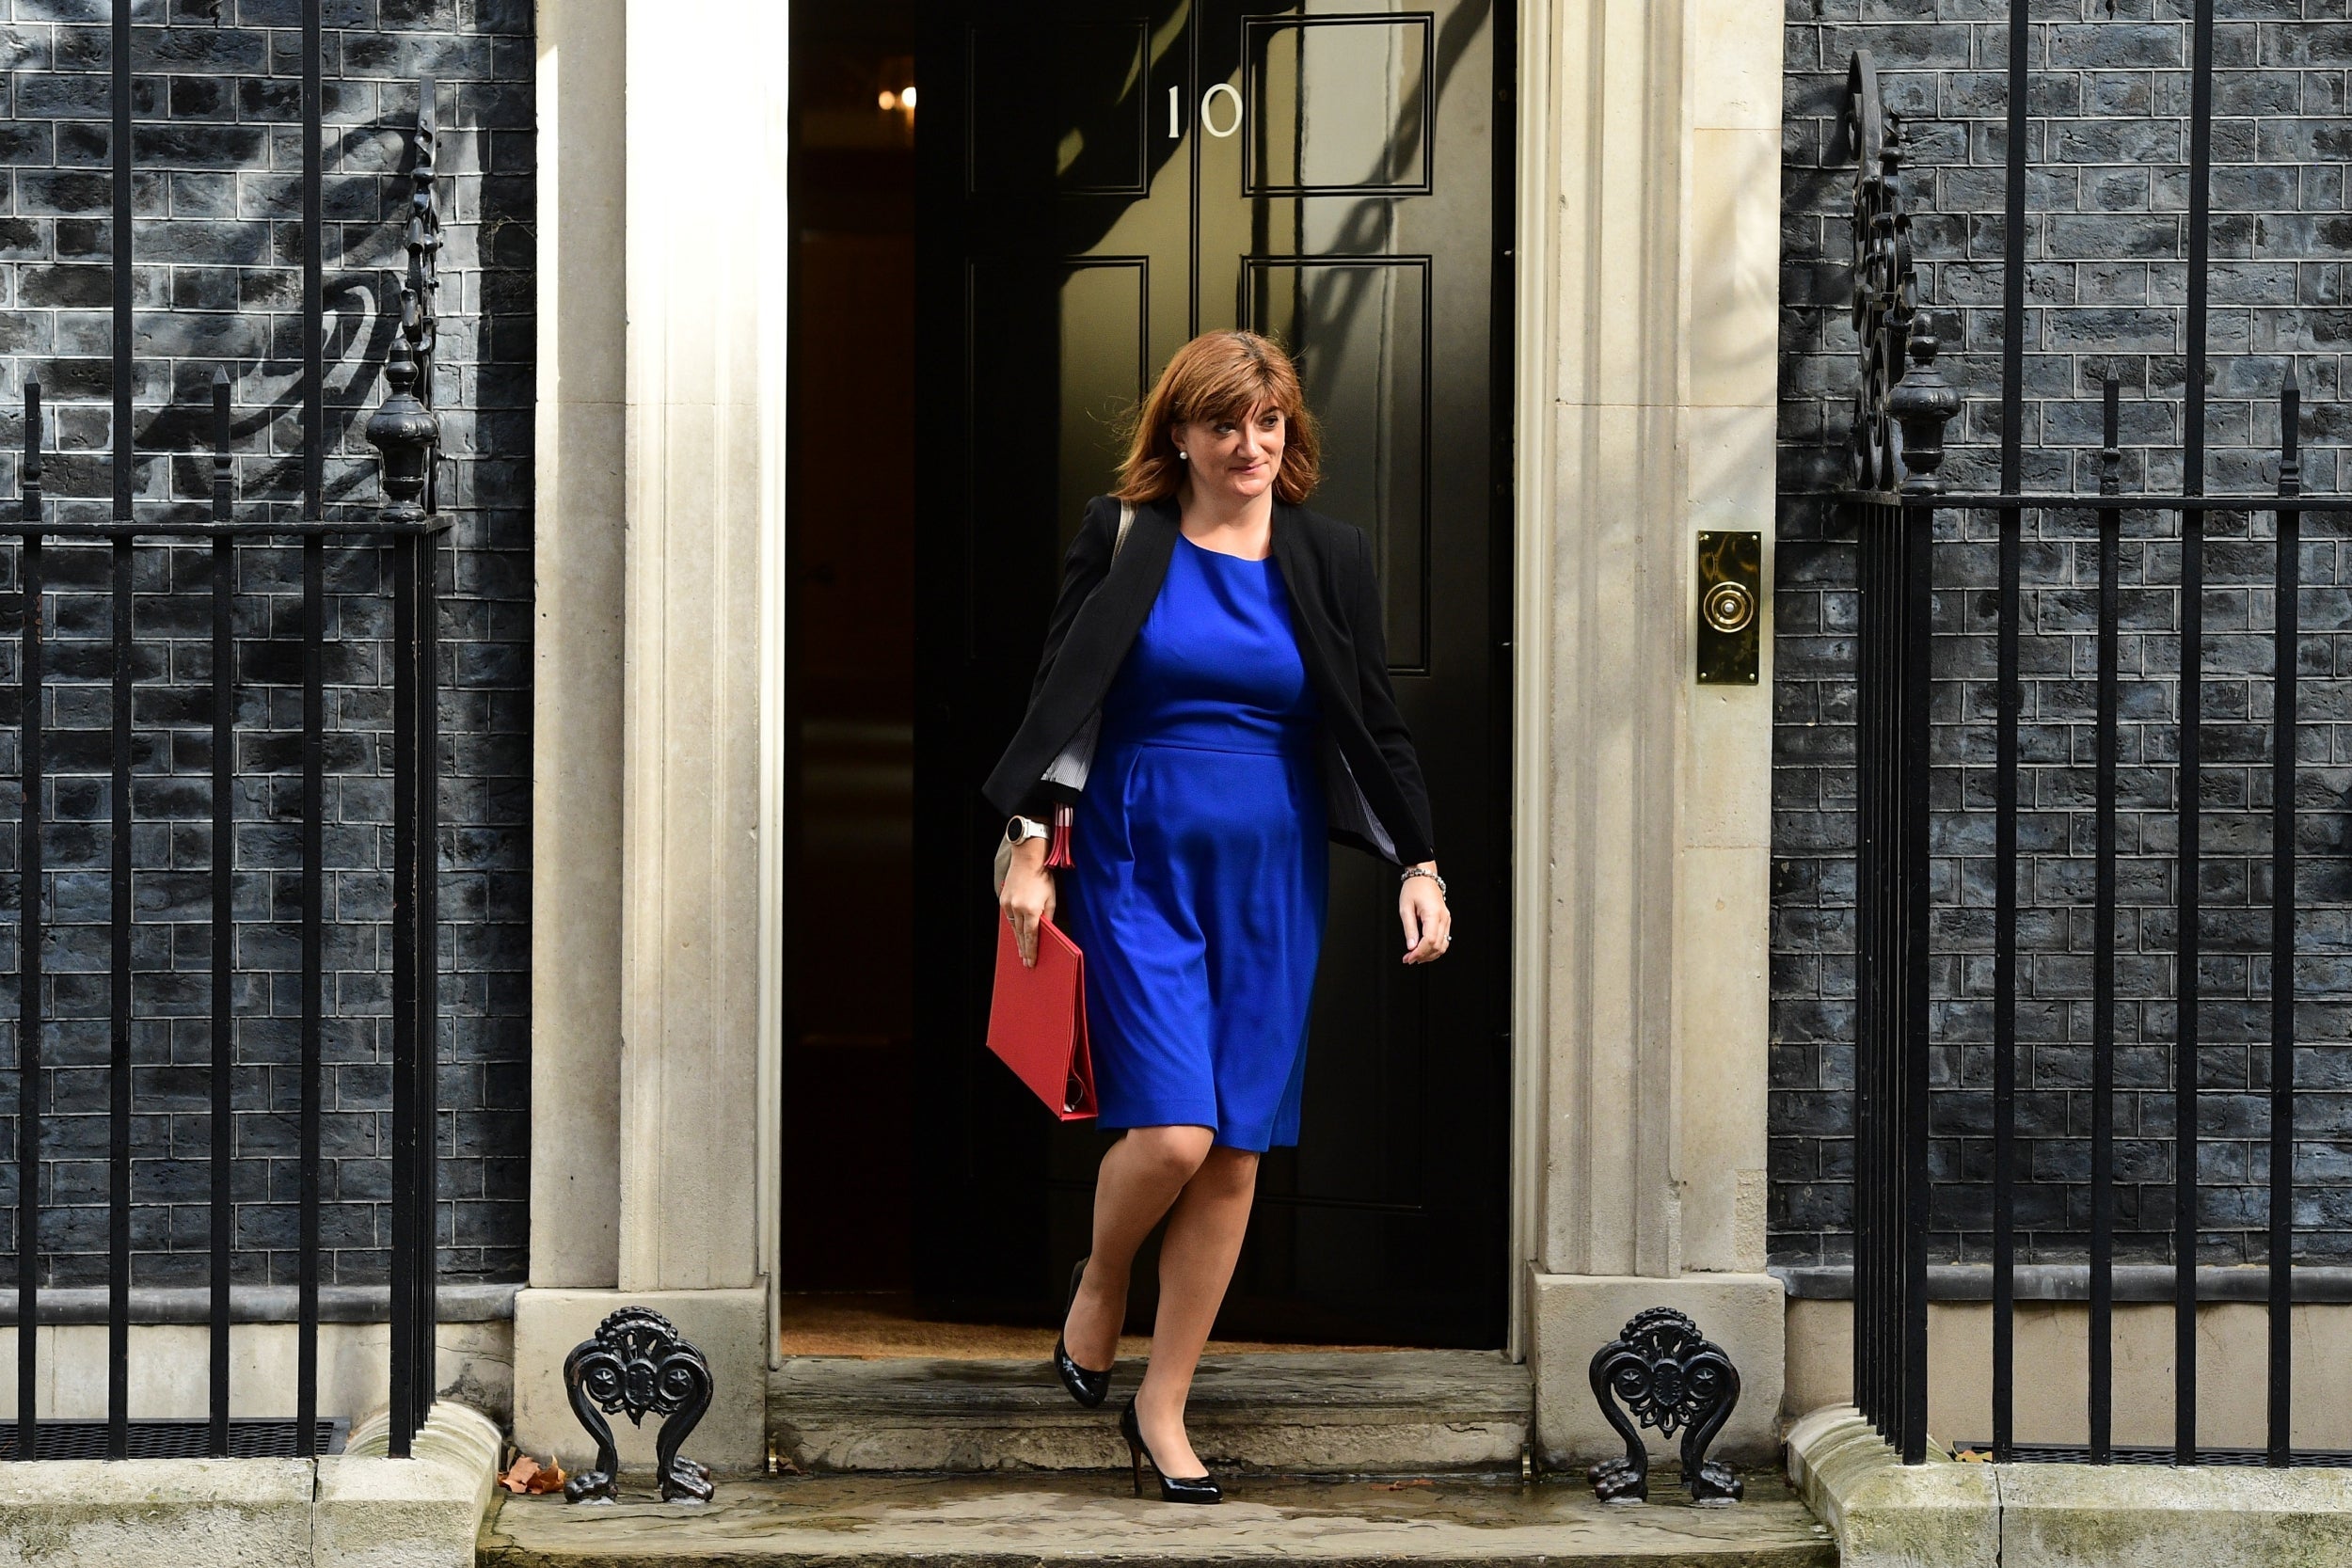 Nicky Morgan has left, and with her goes a moderate voice in the Tory party